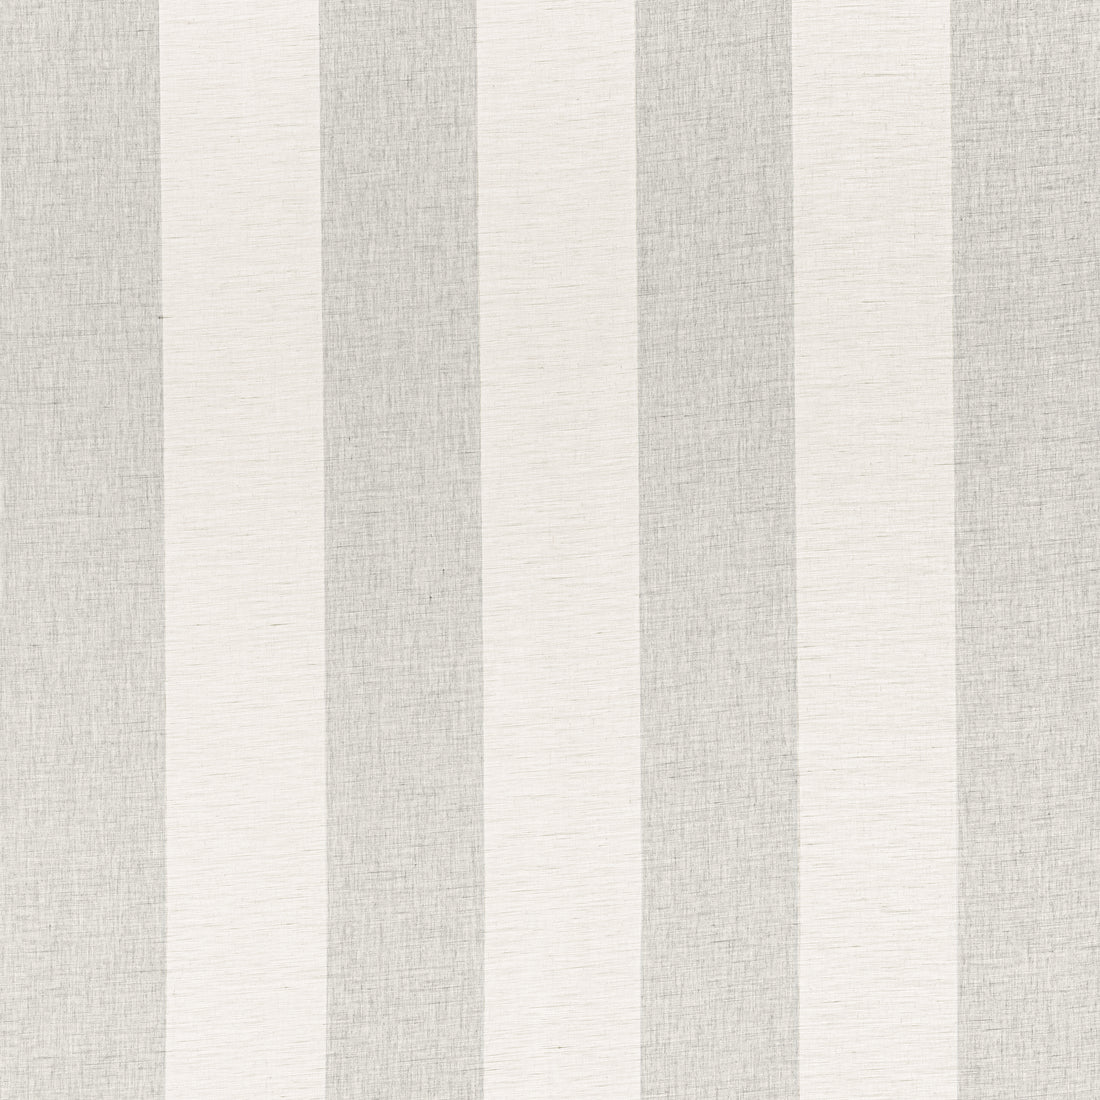 Newport Stripe fabric in smoke and linen color - pattern number FWW8215 - by Thibaut in the Aura collection